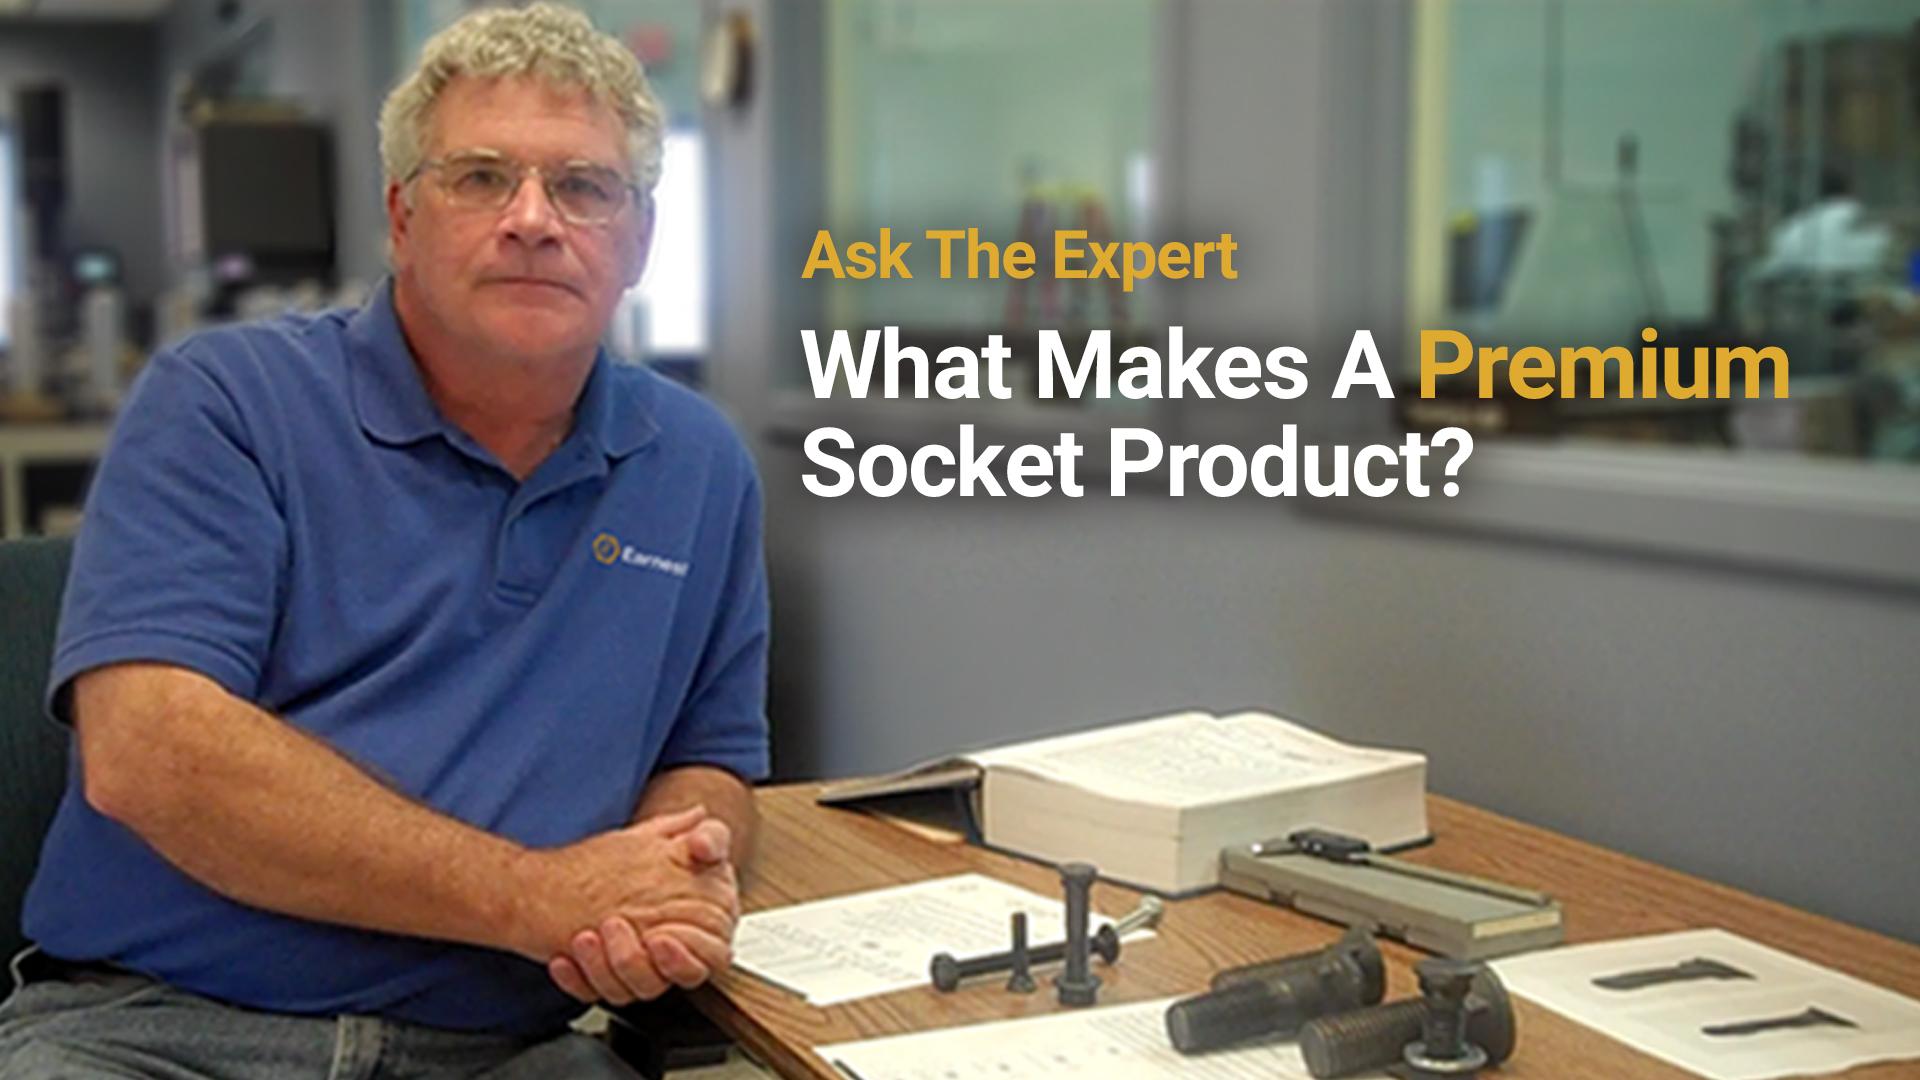 Ask The Expert: What Makes A Premium Socket Product